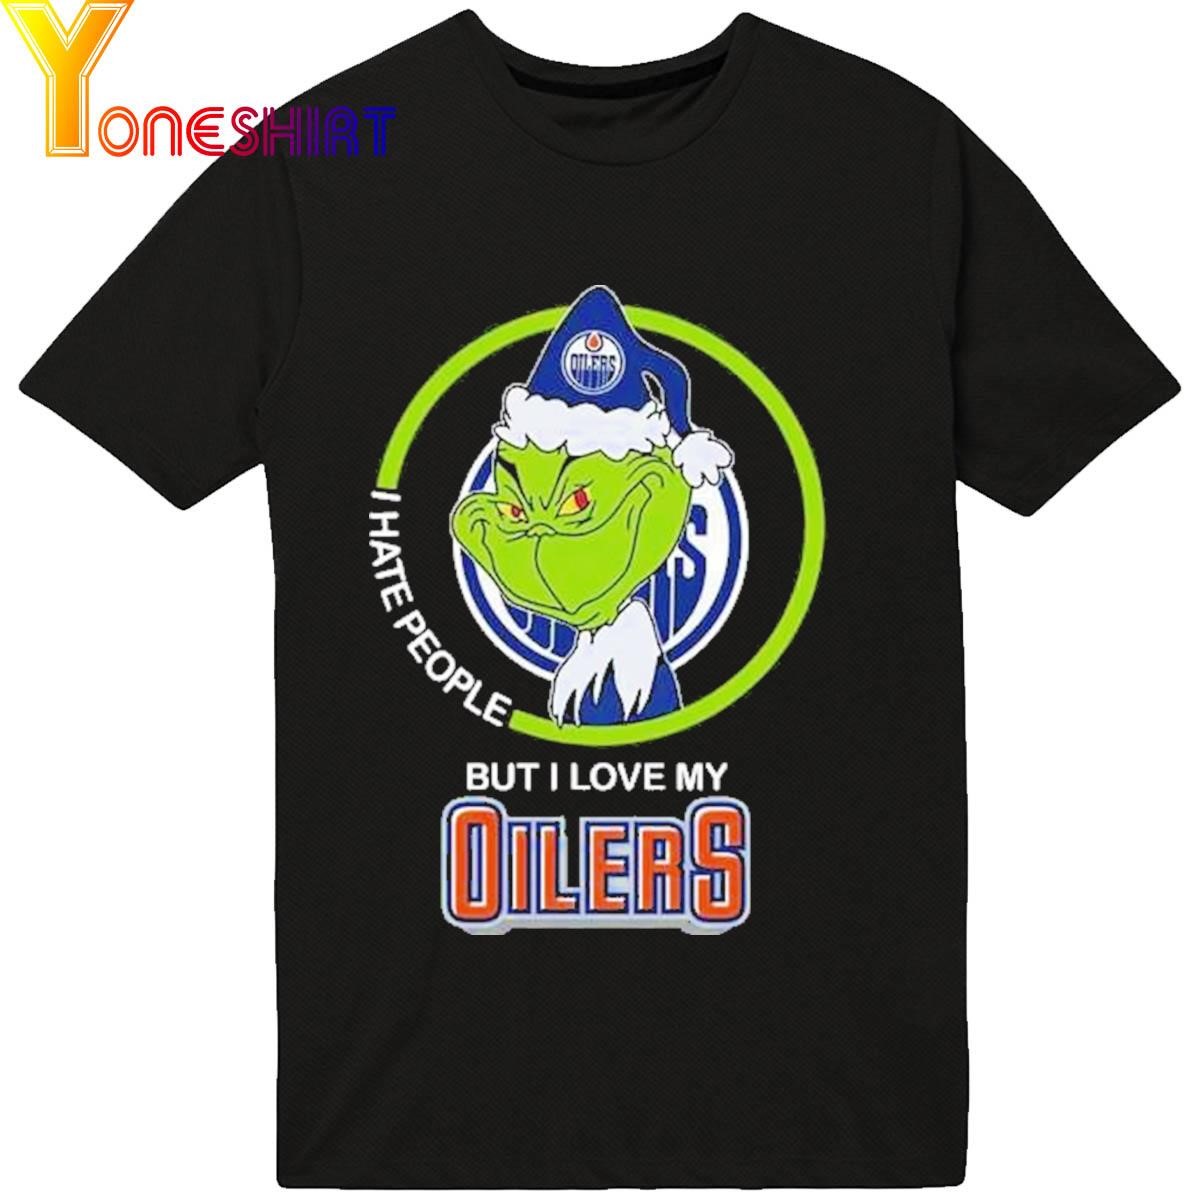 Grinch I Hate People But I Love My Oilers Shirt